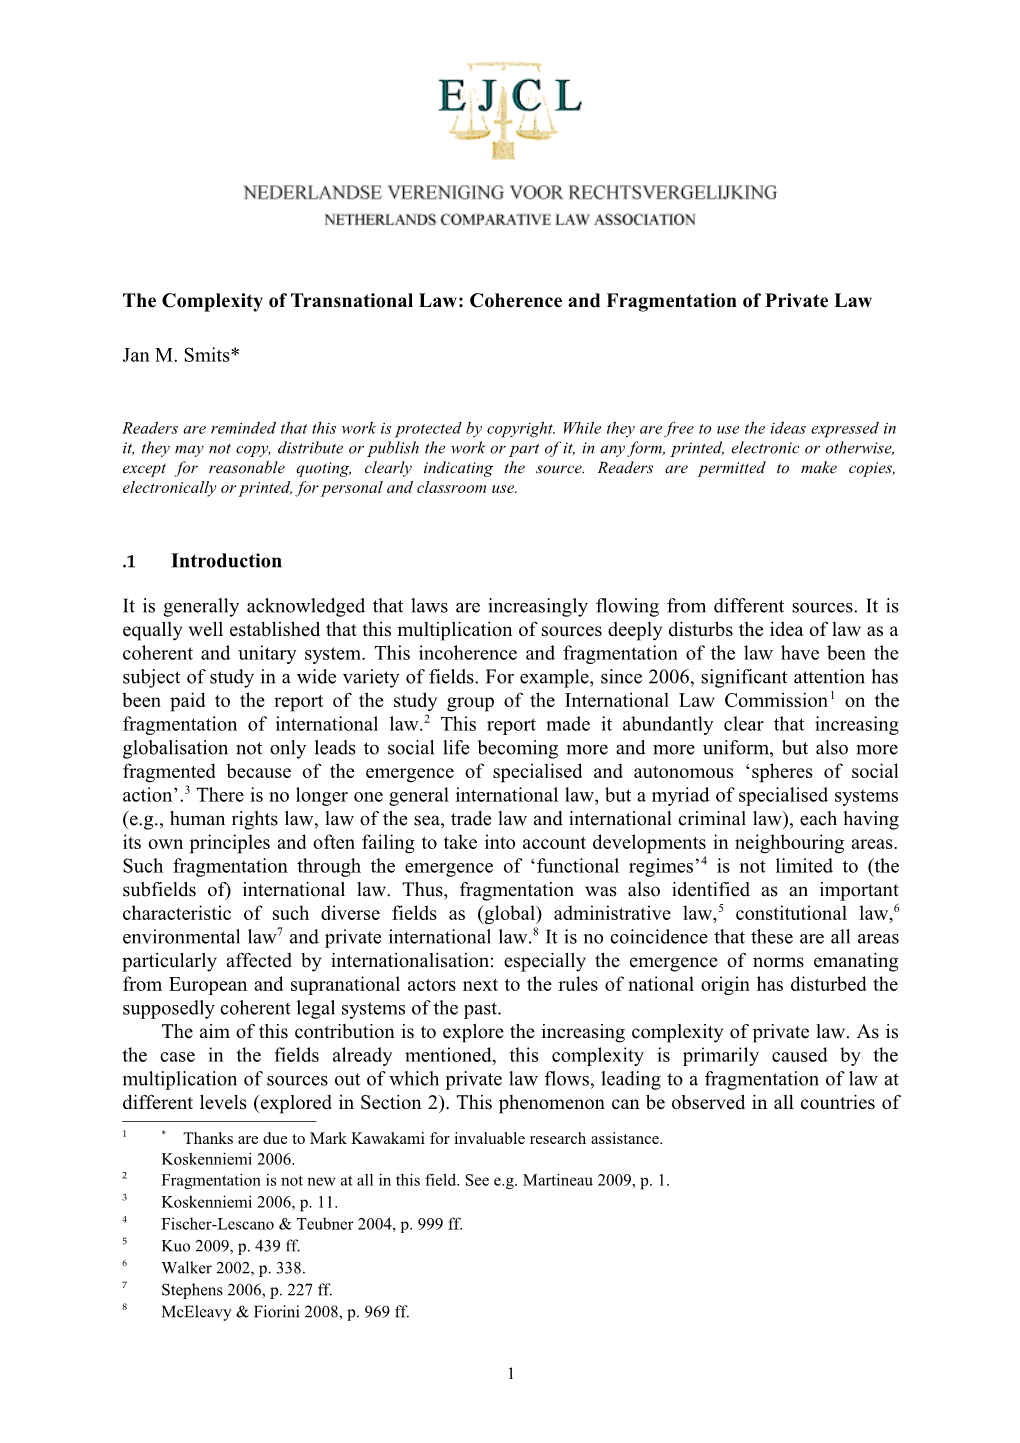 The Complexity of Transnational Law: Coherence and Fragmentation of Private Law